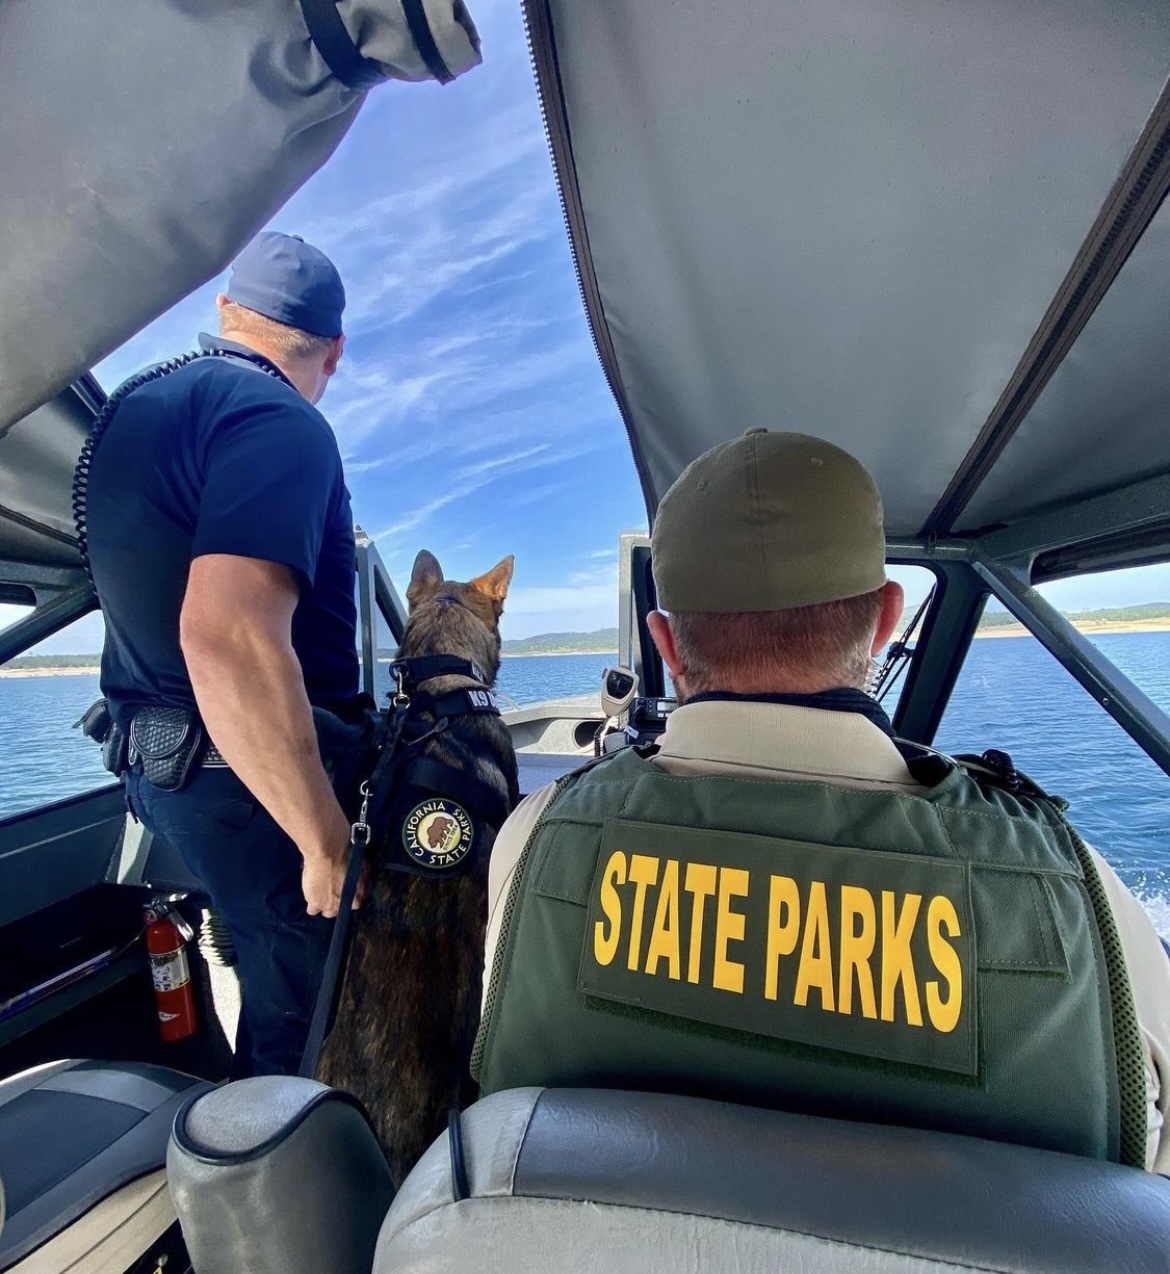 k9 rex on the boat